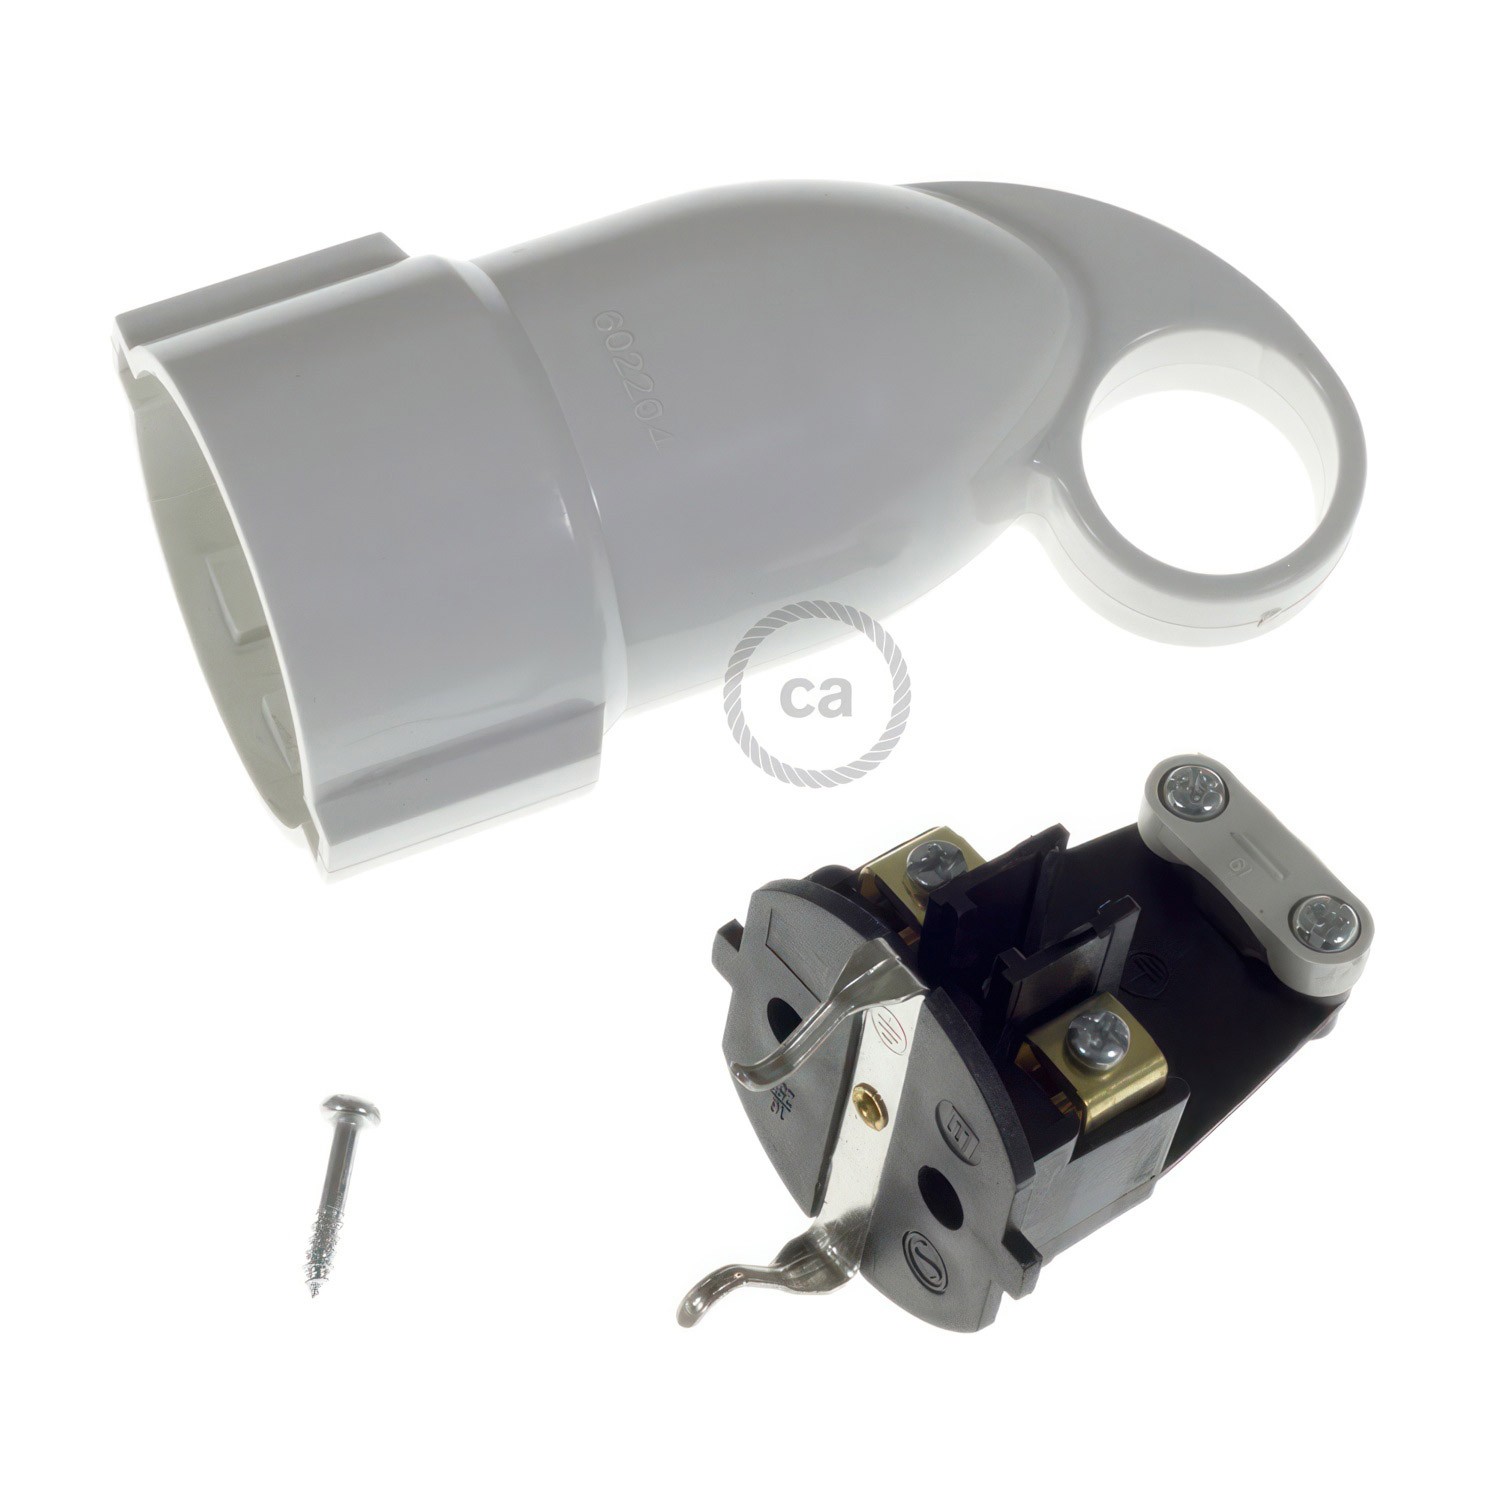 Schuko comfort 16A 250V socket with ring